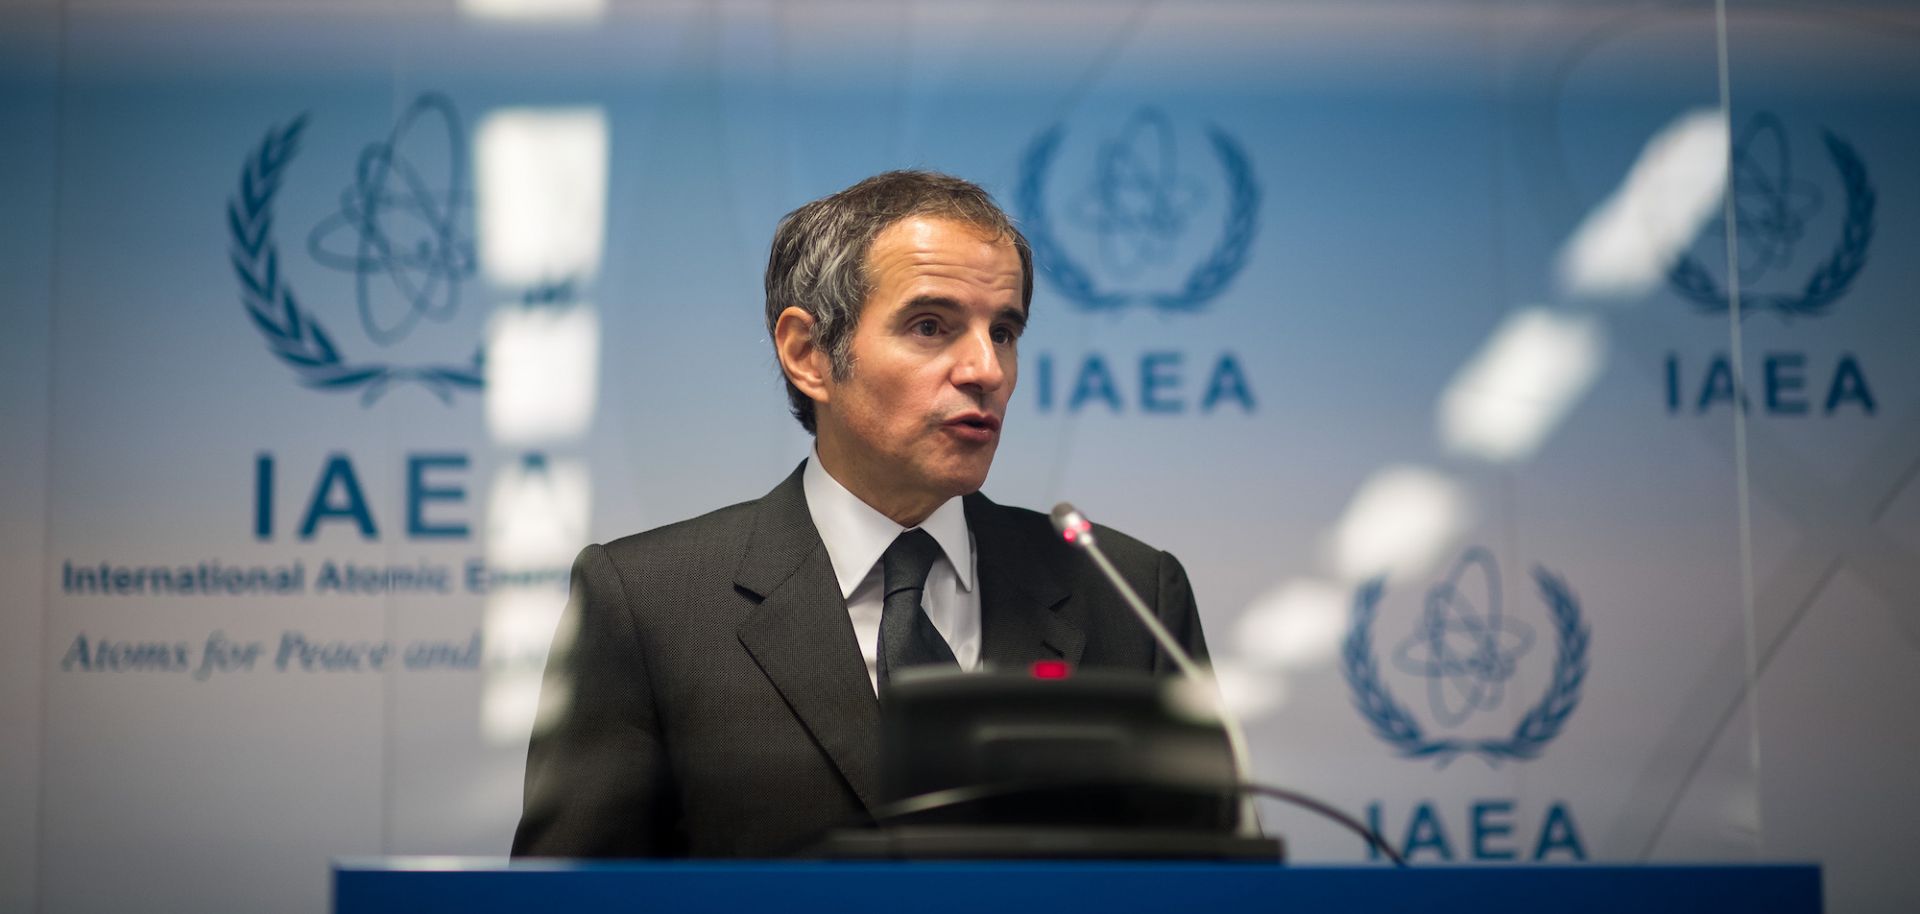 International Atomic Energy Agency (IAEA) Director Rafael Grossi holds a press conference about monitoring Iran's nuclear activities on May 24, 2021, in Vienna, Austria. 